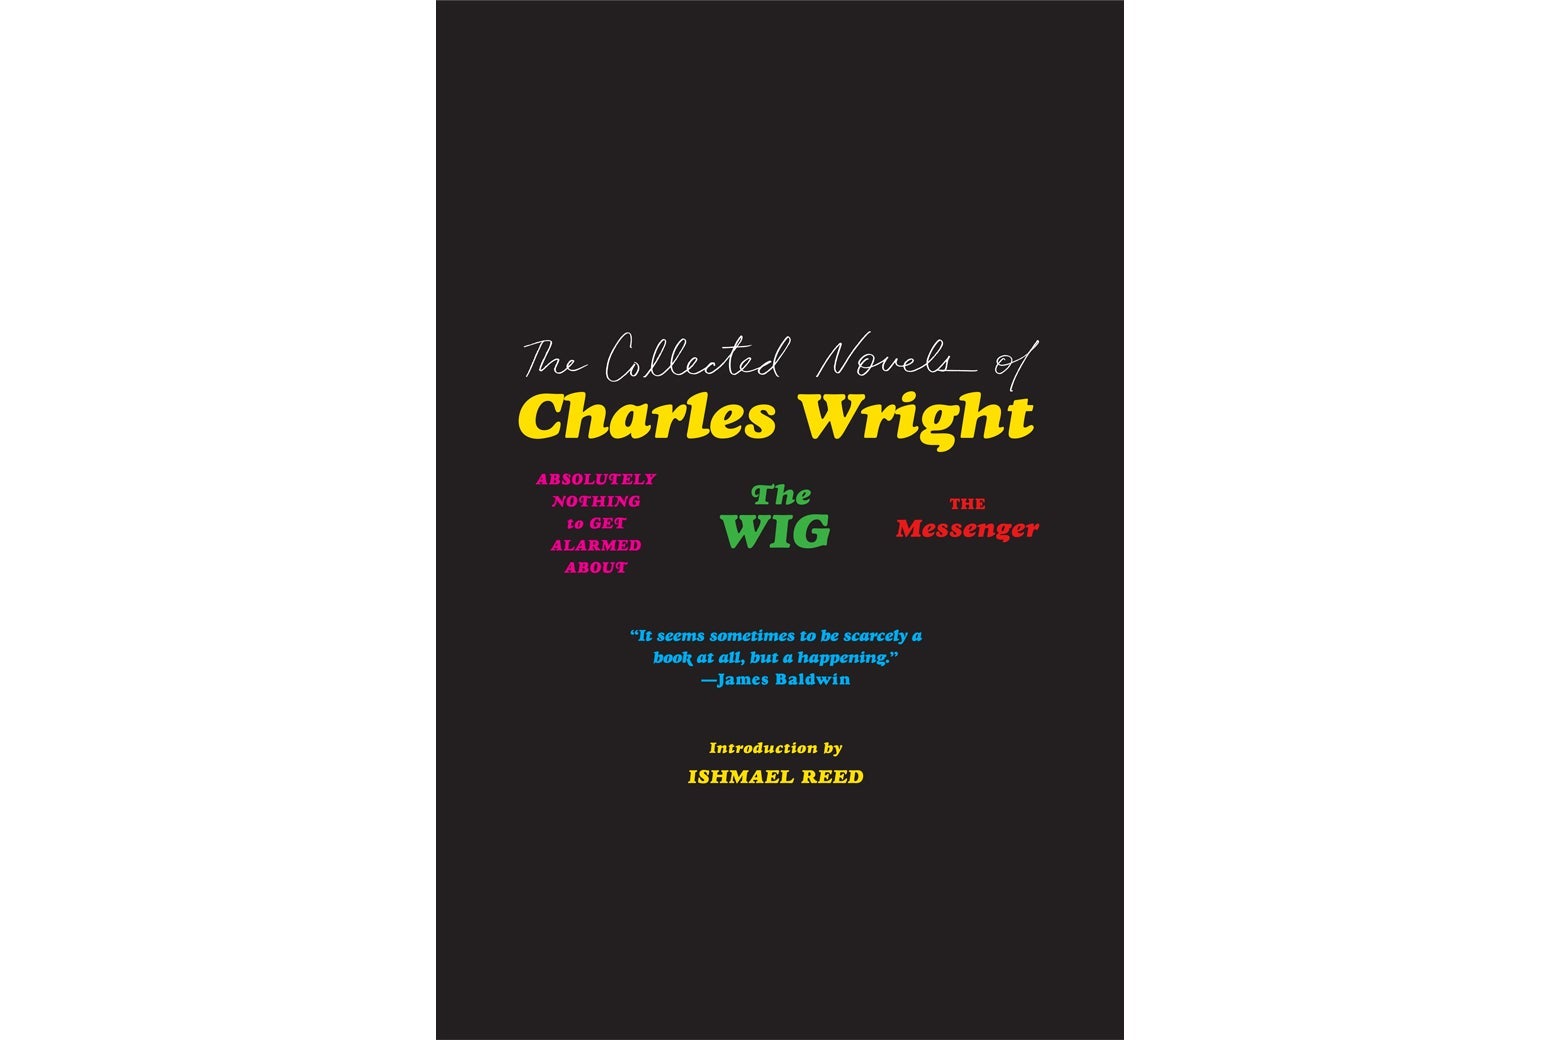 The Collected Novels of Charles Wright book cover.